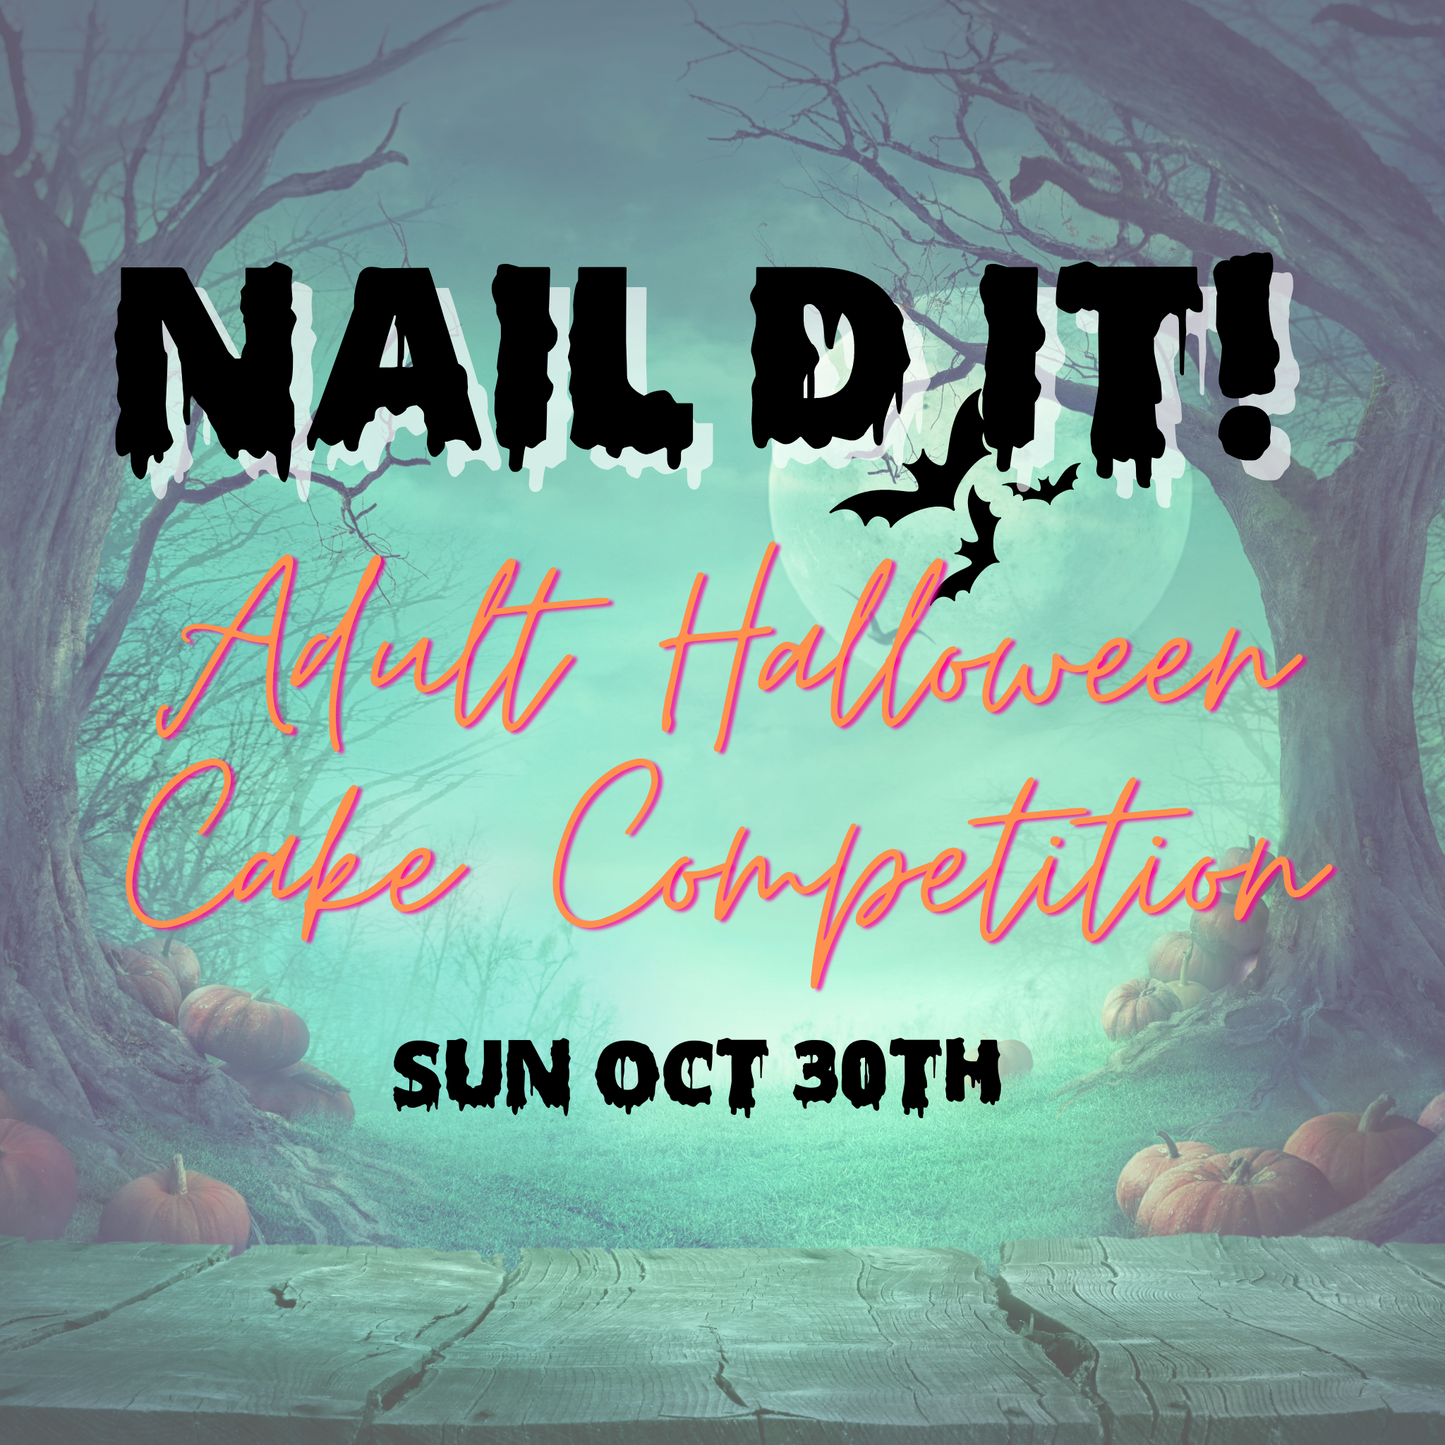 Nail'd It! Adult Halloween Competition (SUN Oct 30TH)